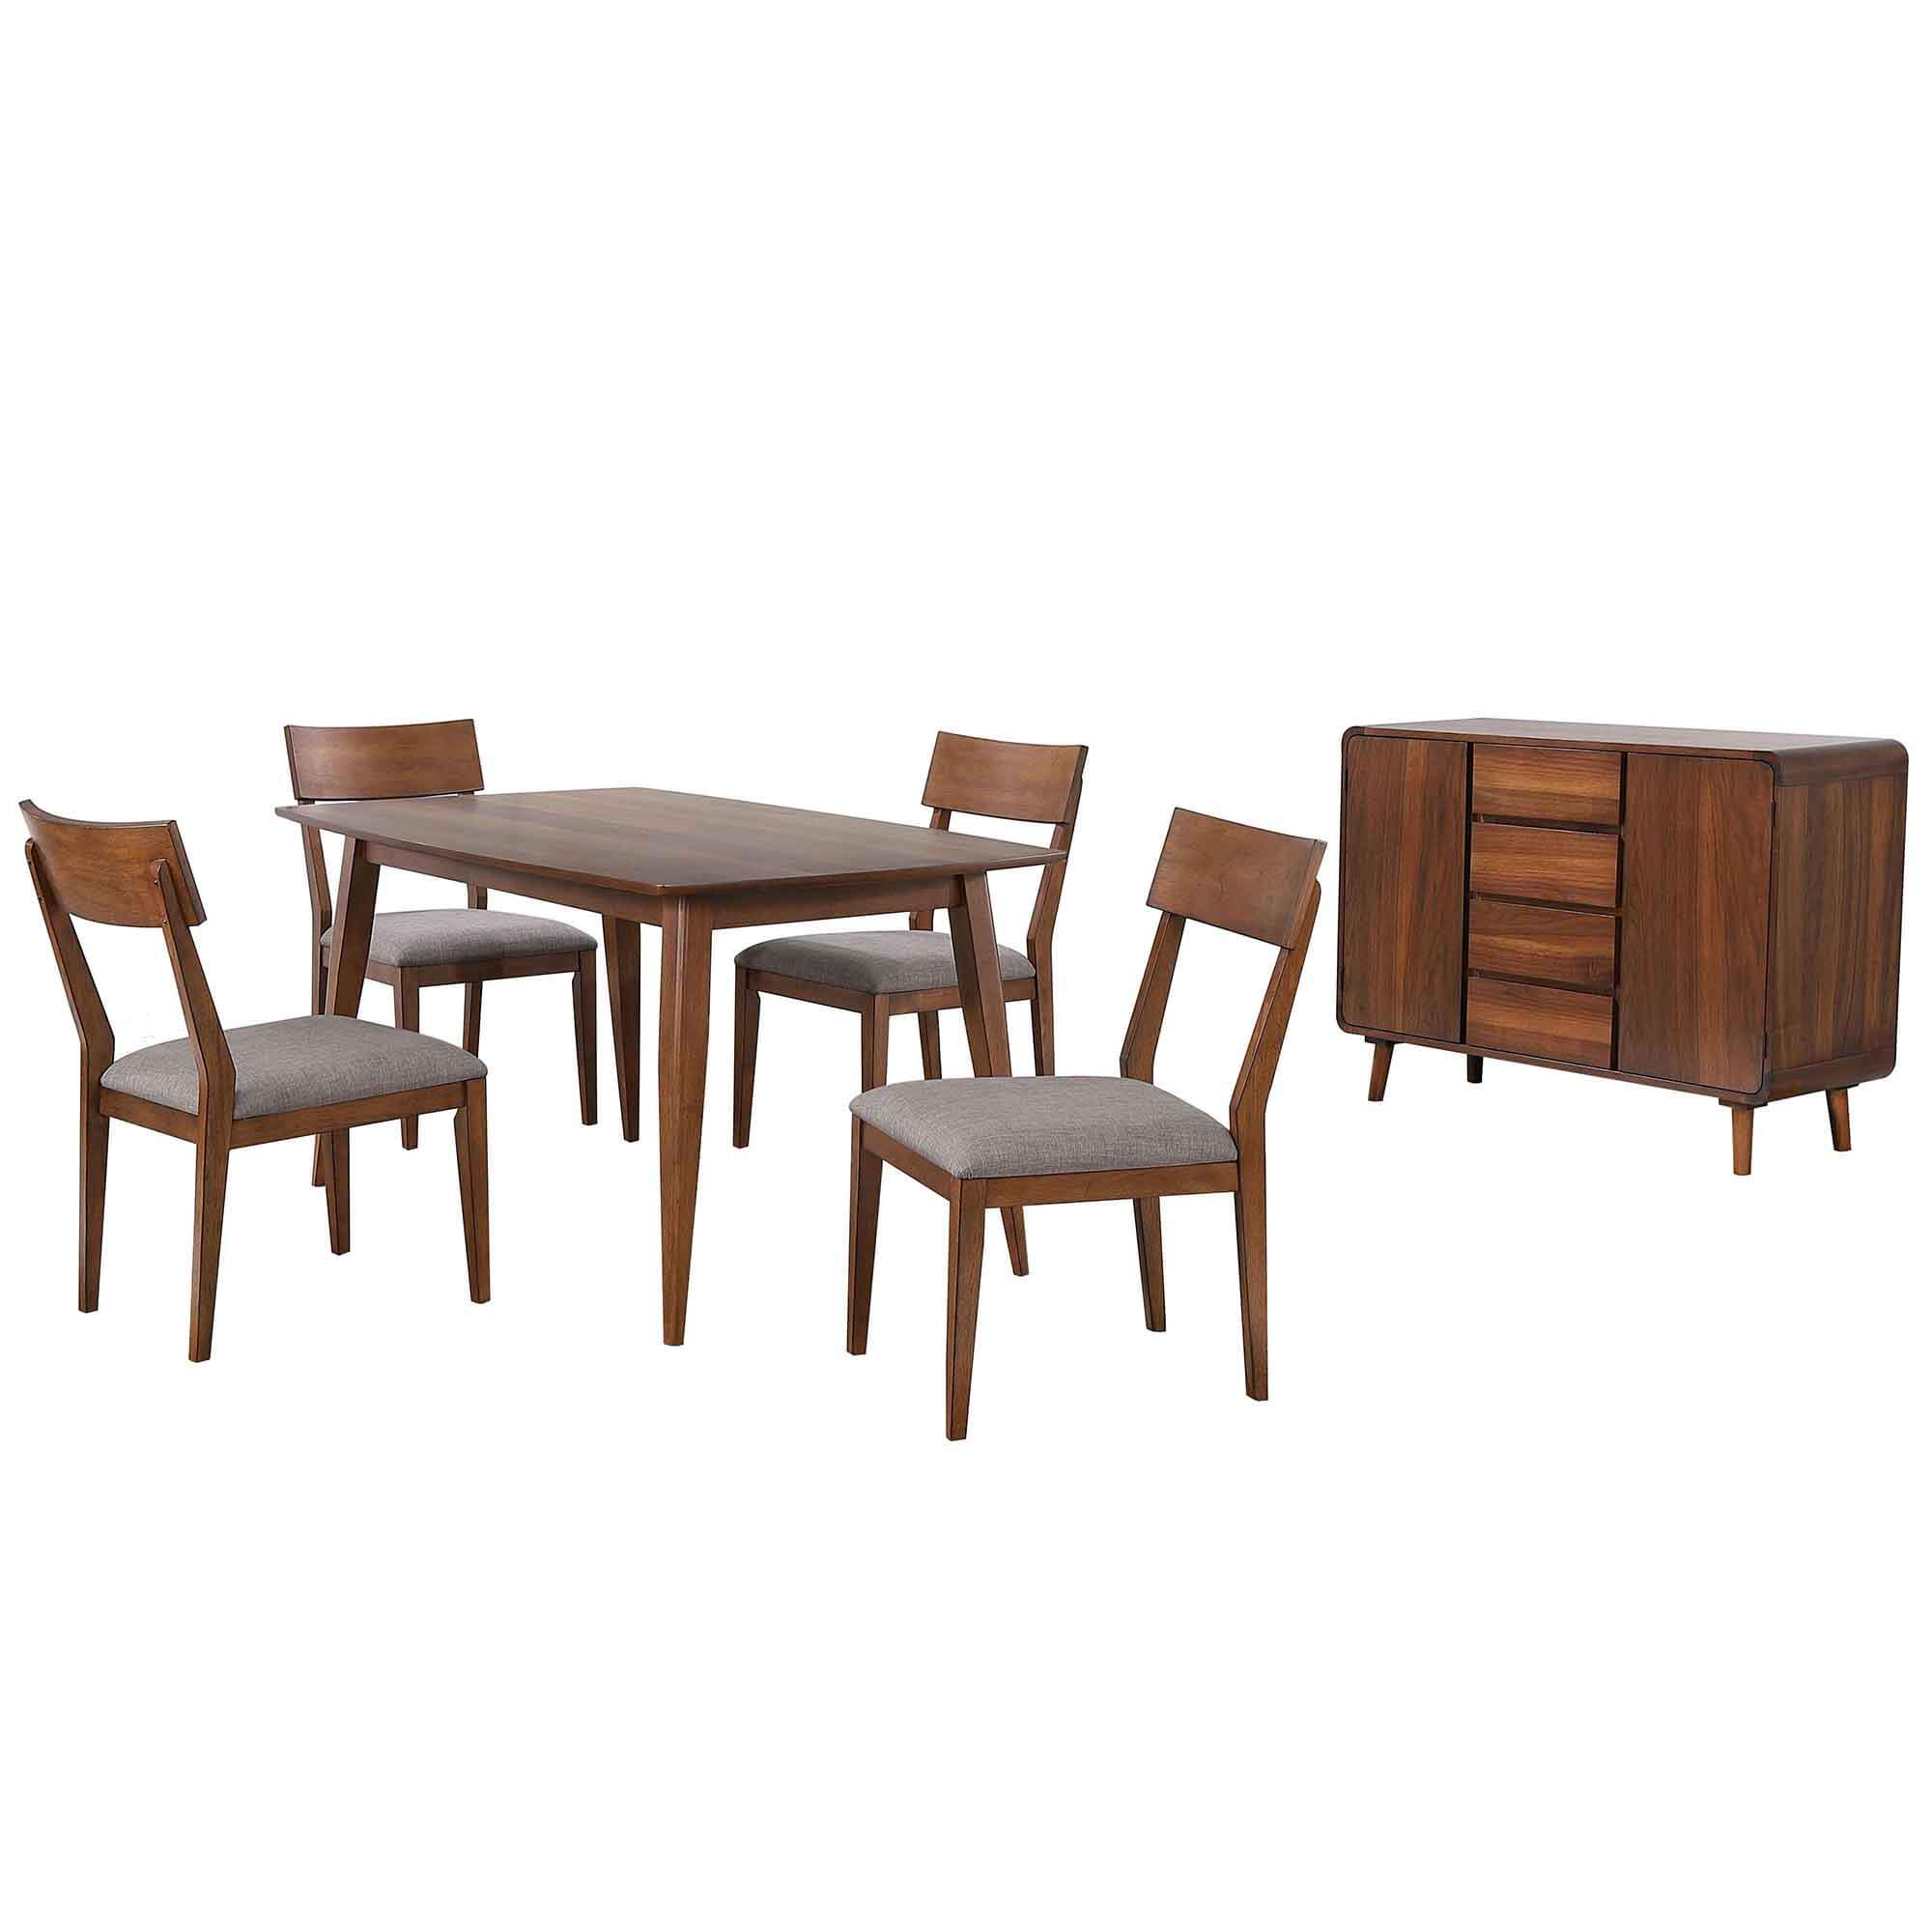 Dining Table Set W Padded Performance, Performance Fabric Dining Room Chairs